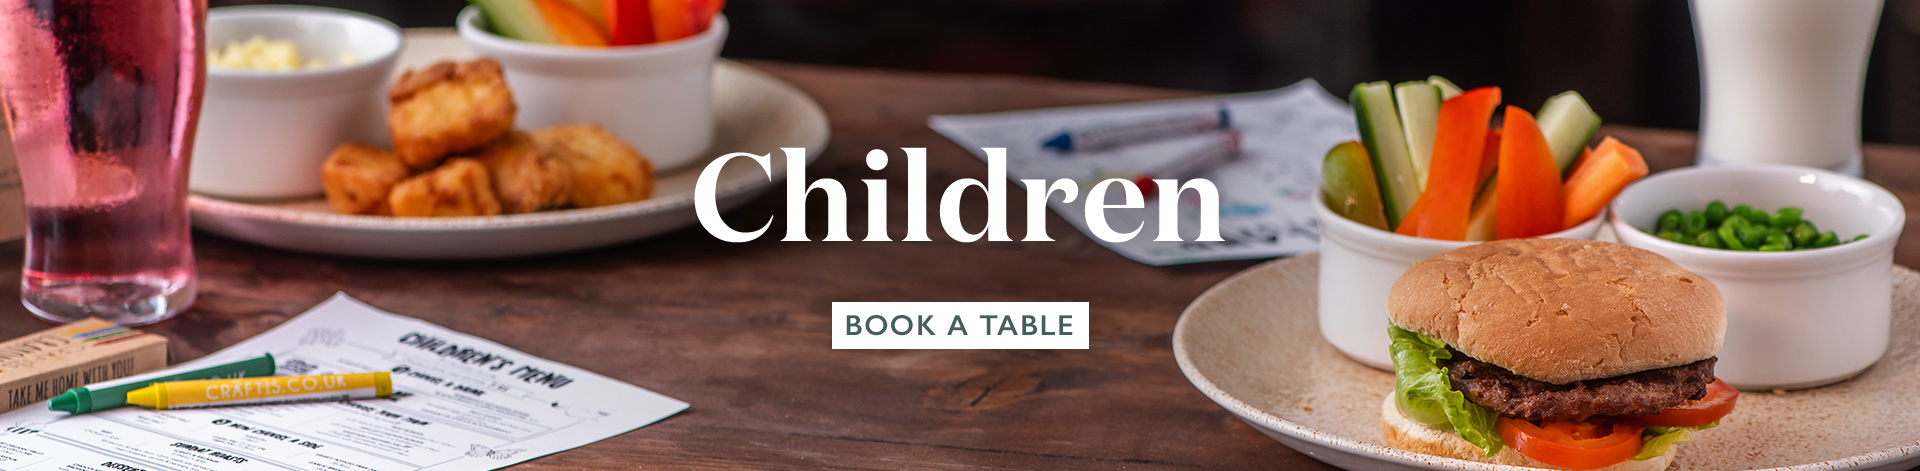 Children's Menu at The Bay Horse